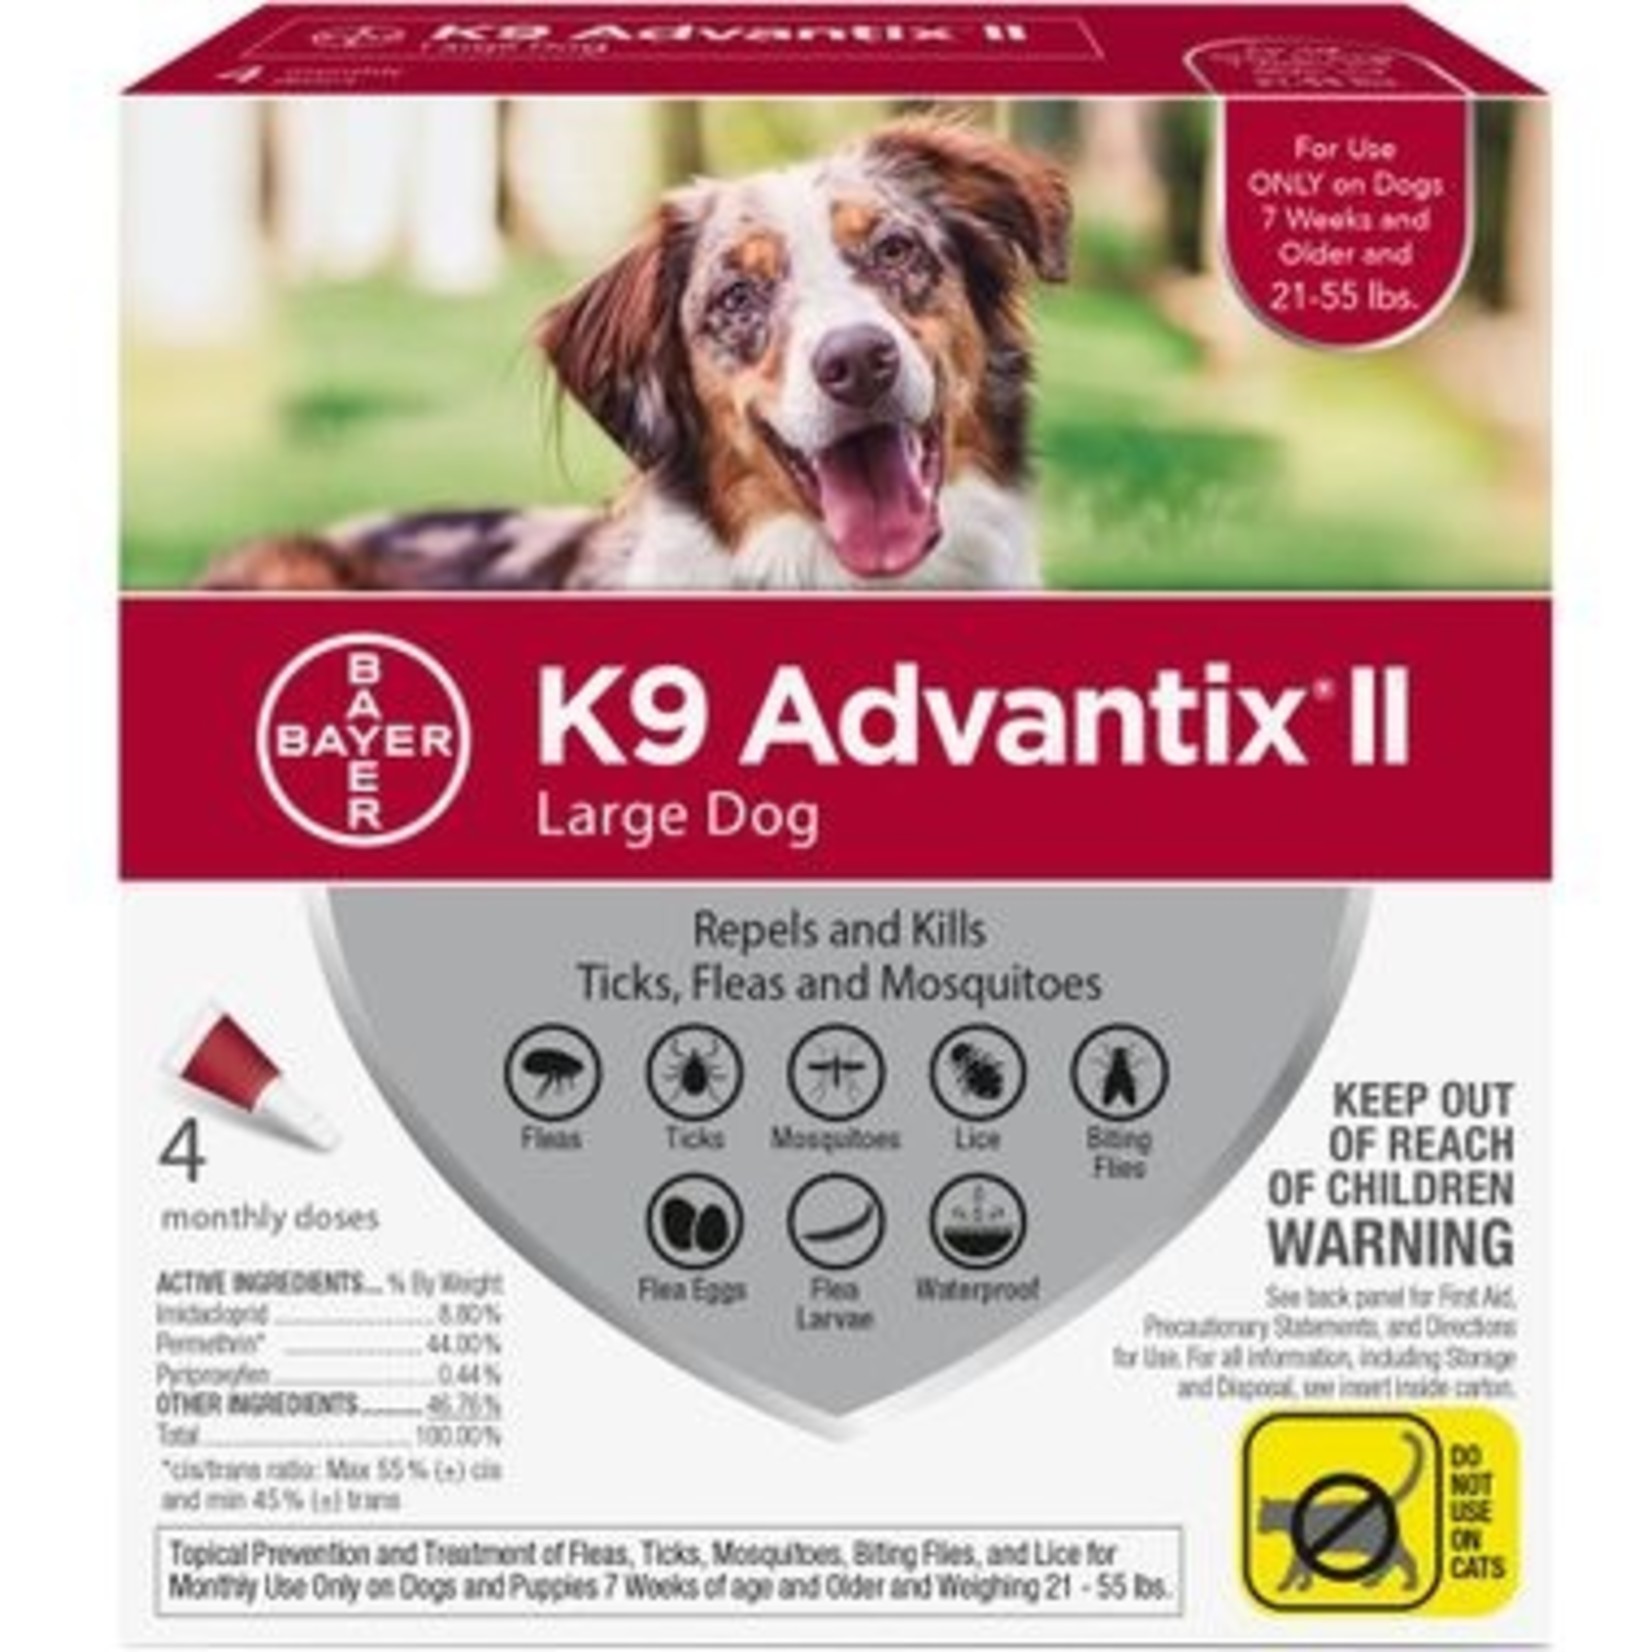 K9 Advantix II Dogs Complete protection Tick and Flea for dogs 11kg to 25kg (4 dosage)